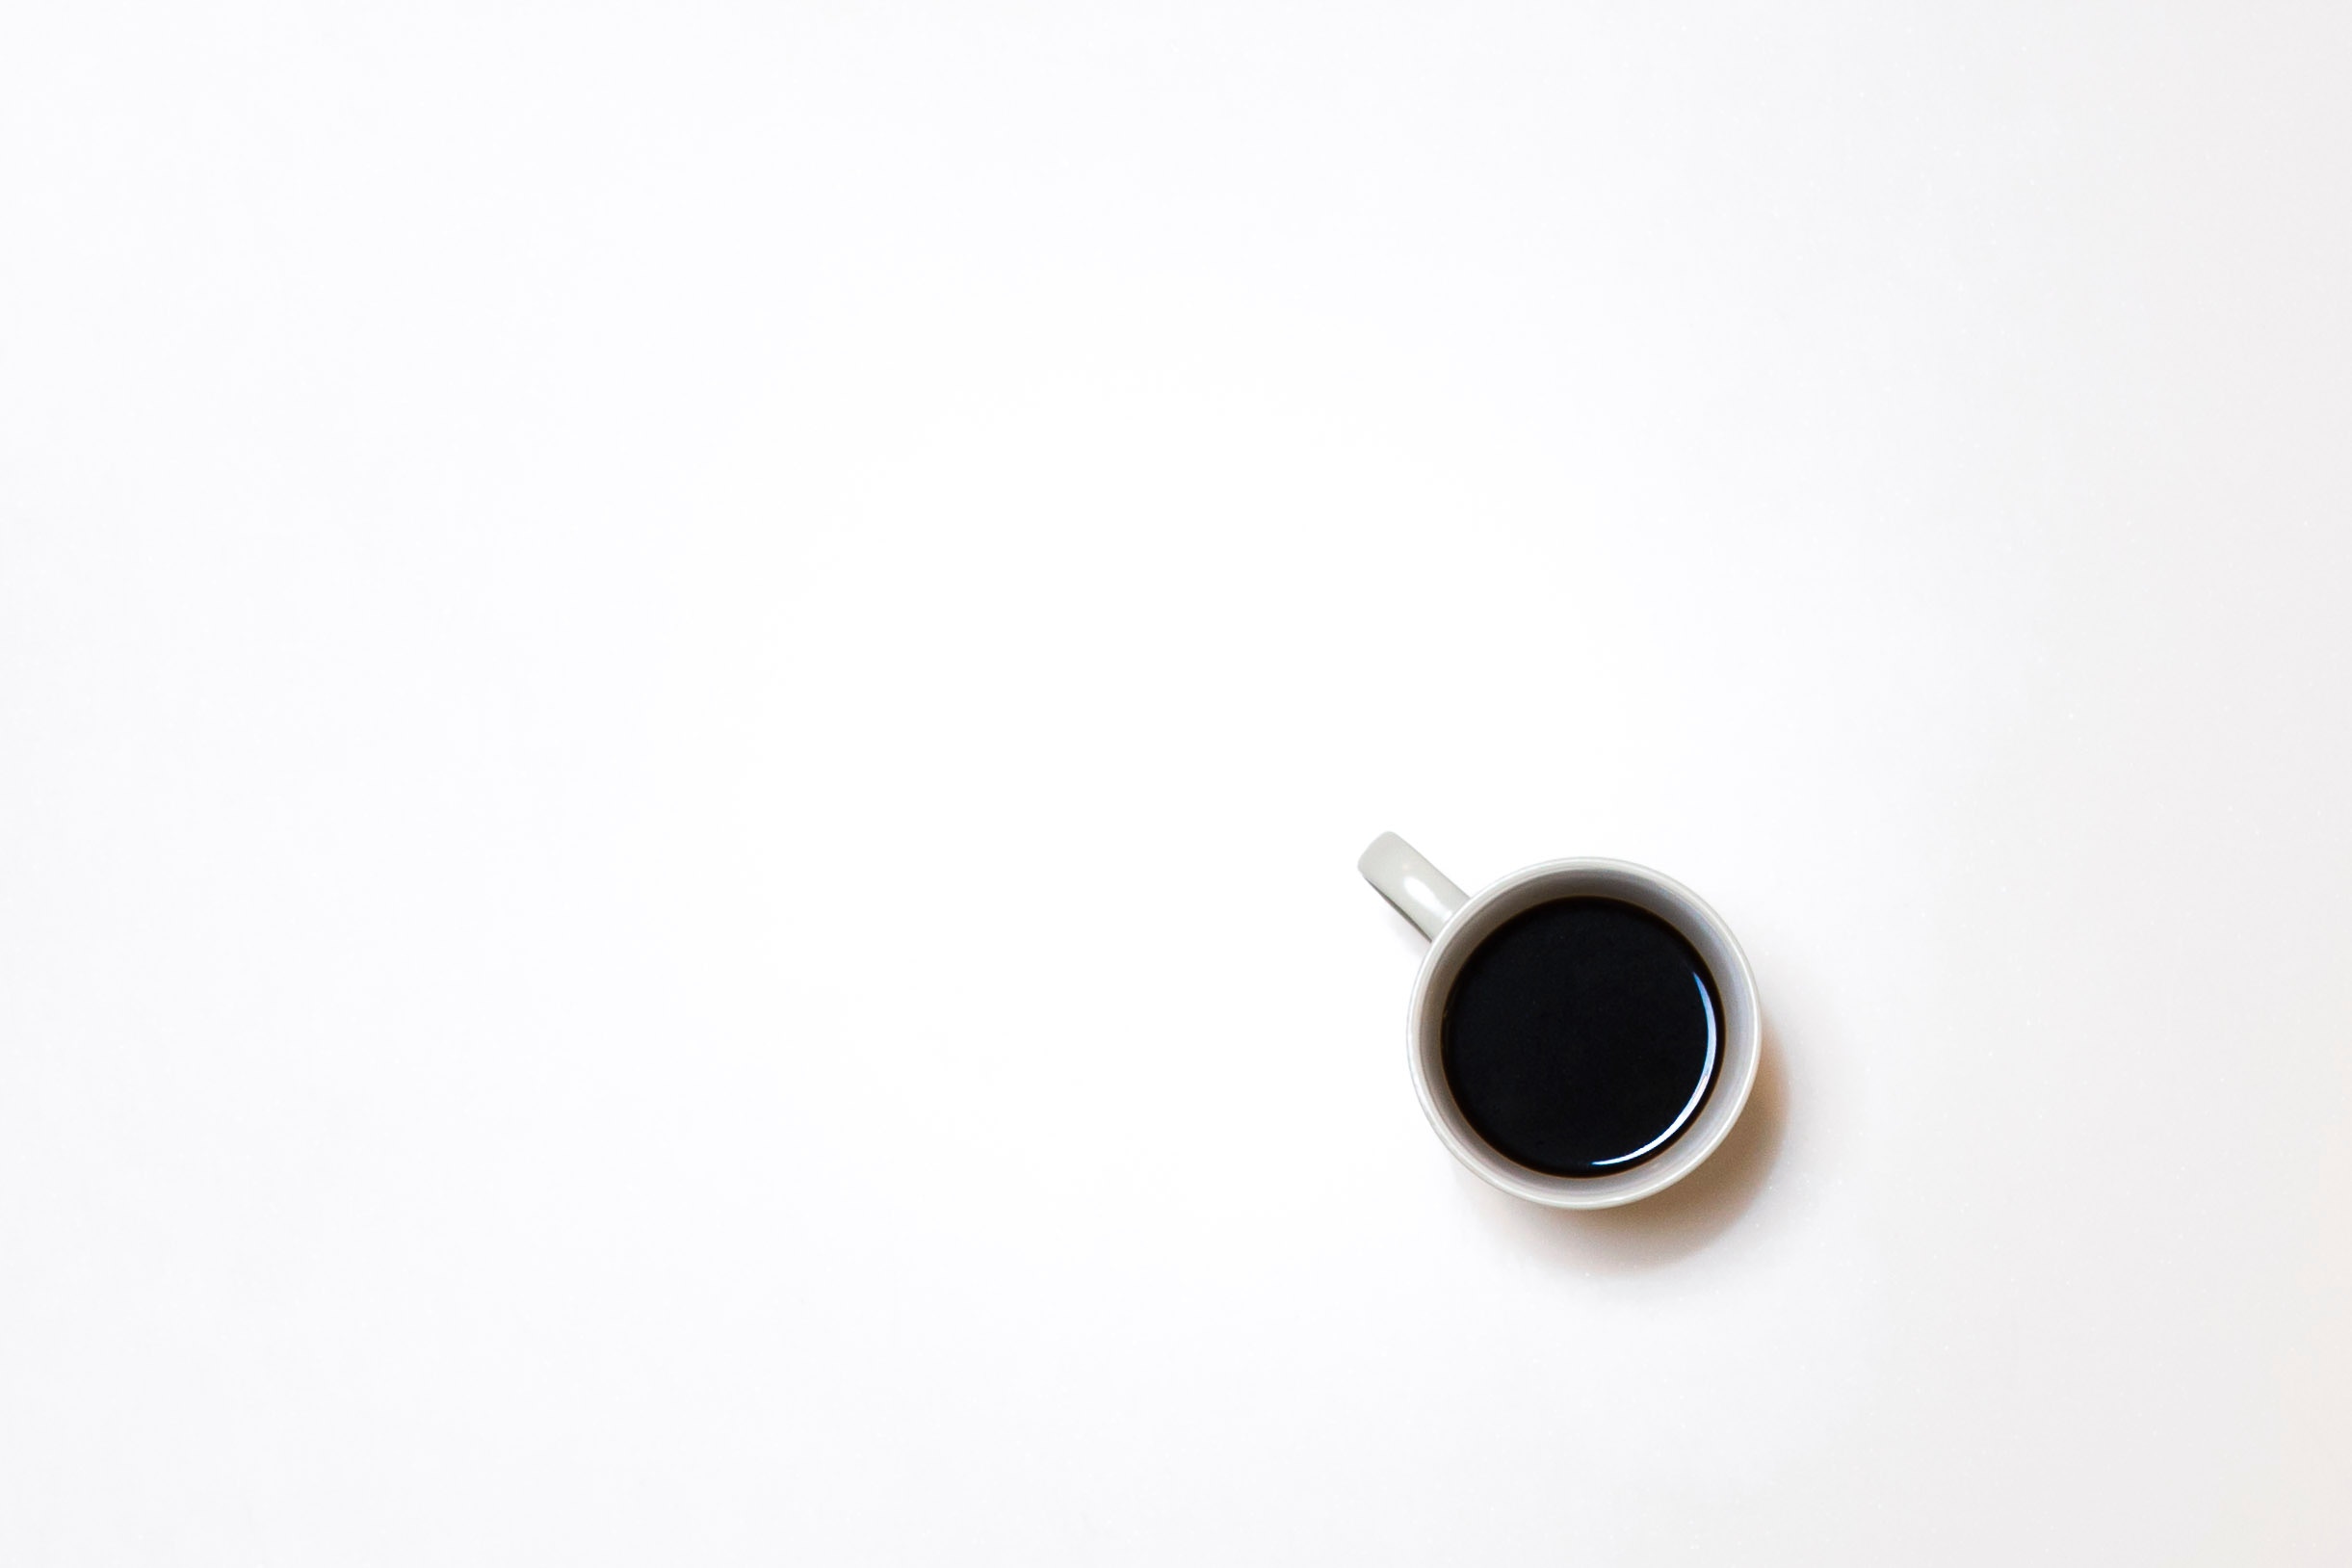 2442x1628 #one, #coffee, #Free , #wake up, #white background, #background, #cup, #black and white, #looking down, #drink, #essential, #minimal, #minimalist, #table, #negative space, #from above, # wallpaper, #mug. Mocah HD Wallpaper